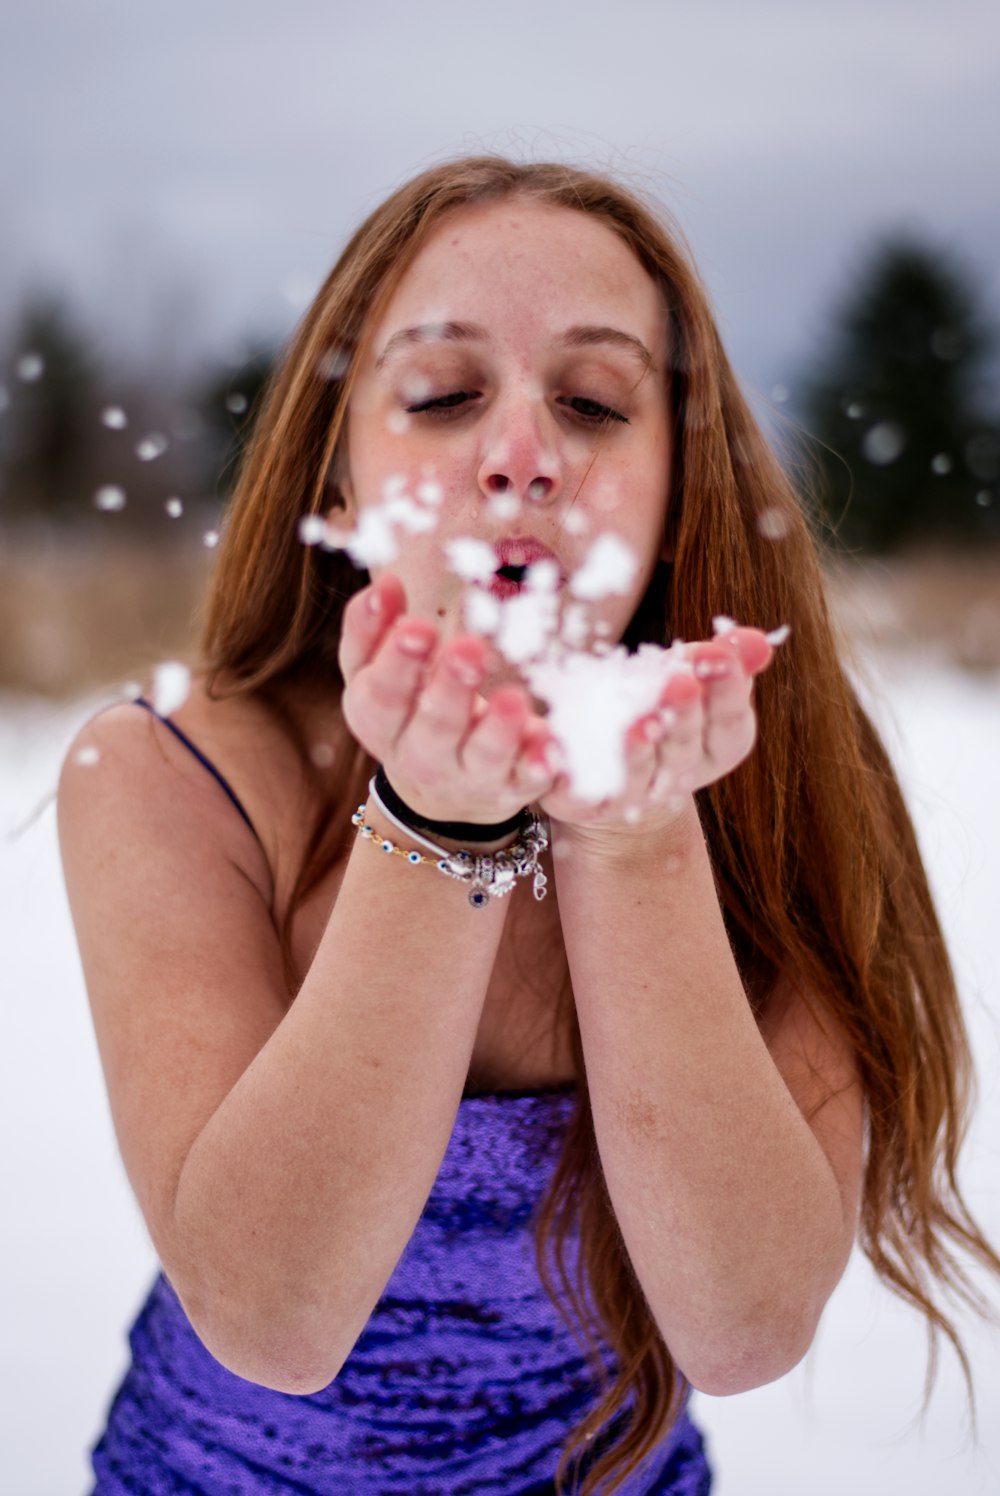 a woman blowing snow on her hands in the snow